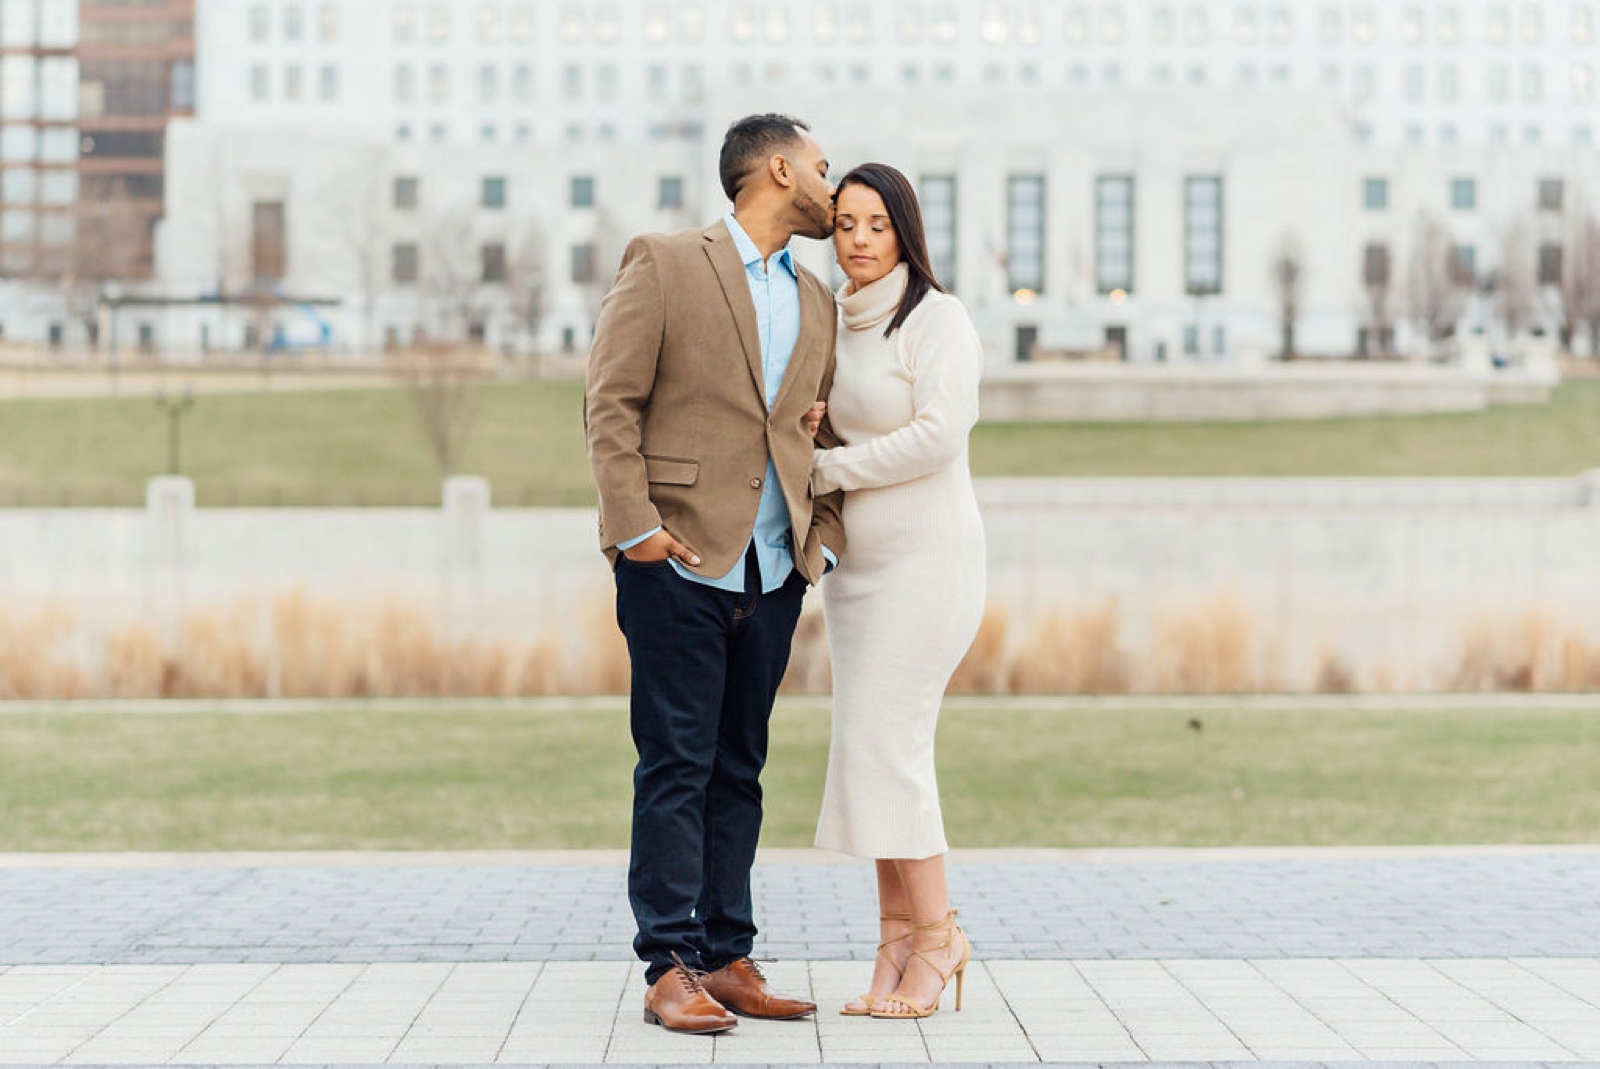 Engagement outfit inspiration - bride in a cream dress, groom in khaki jacket